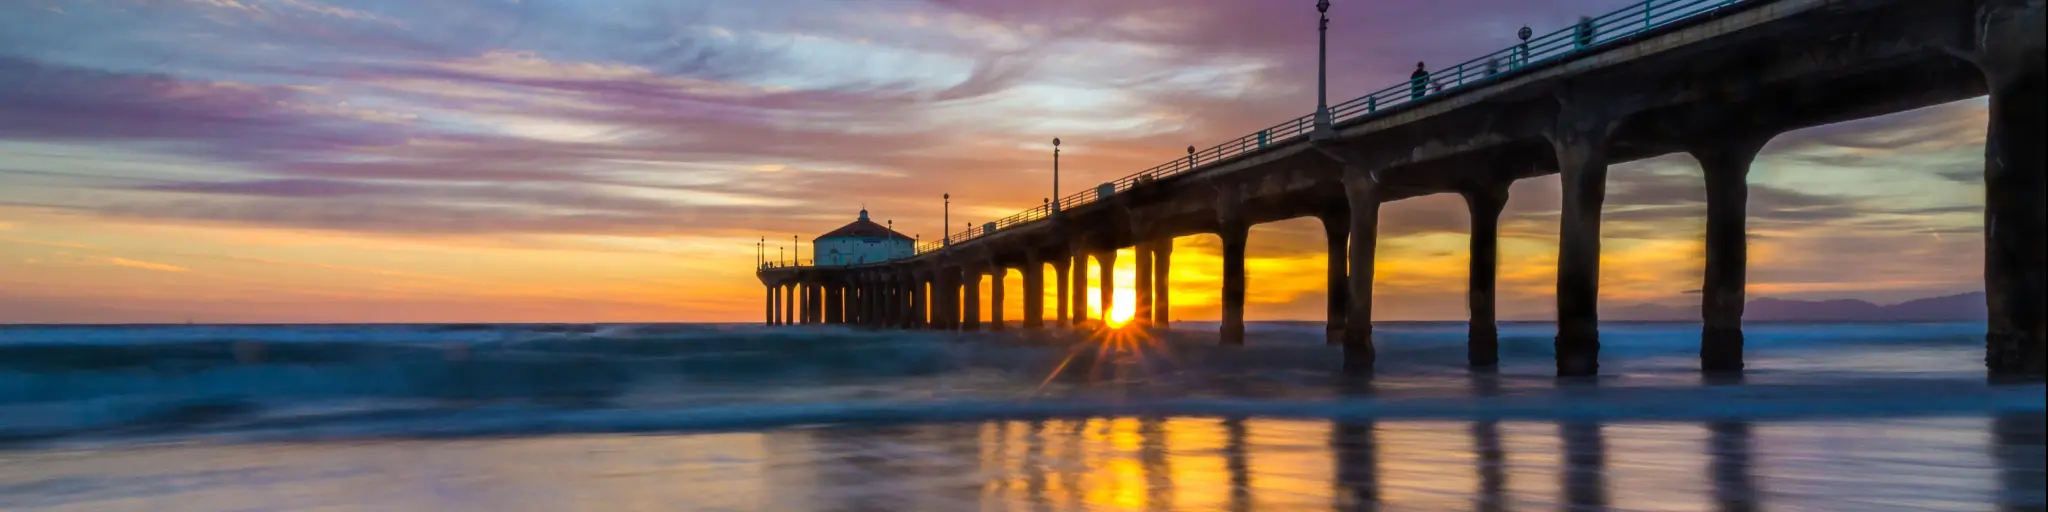 Manhattan Beach Pier, Los Angeles, USA with a long-exposure shot of the colorful sky and clouds over Manhattan Beach Pier at sunset with smooth waves washing onto the beach.